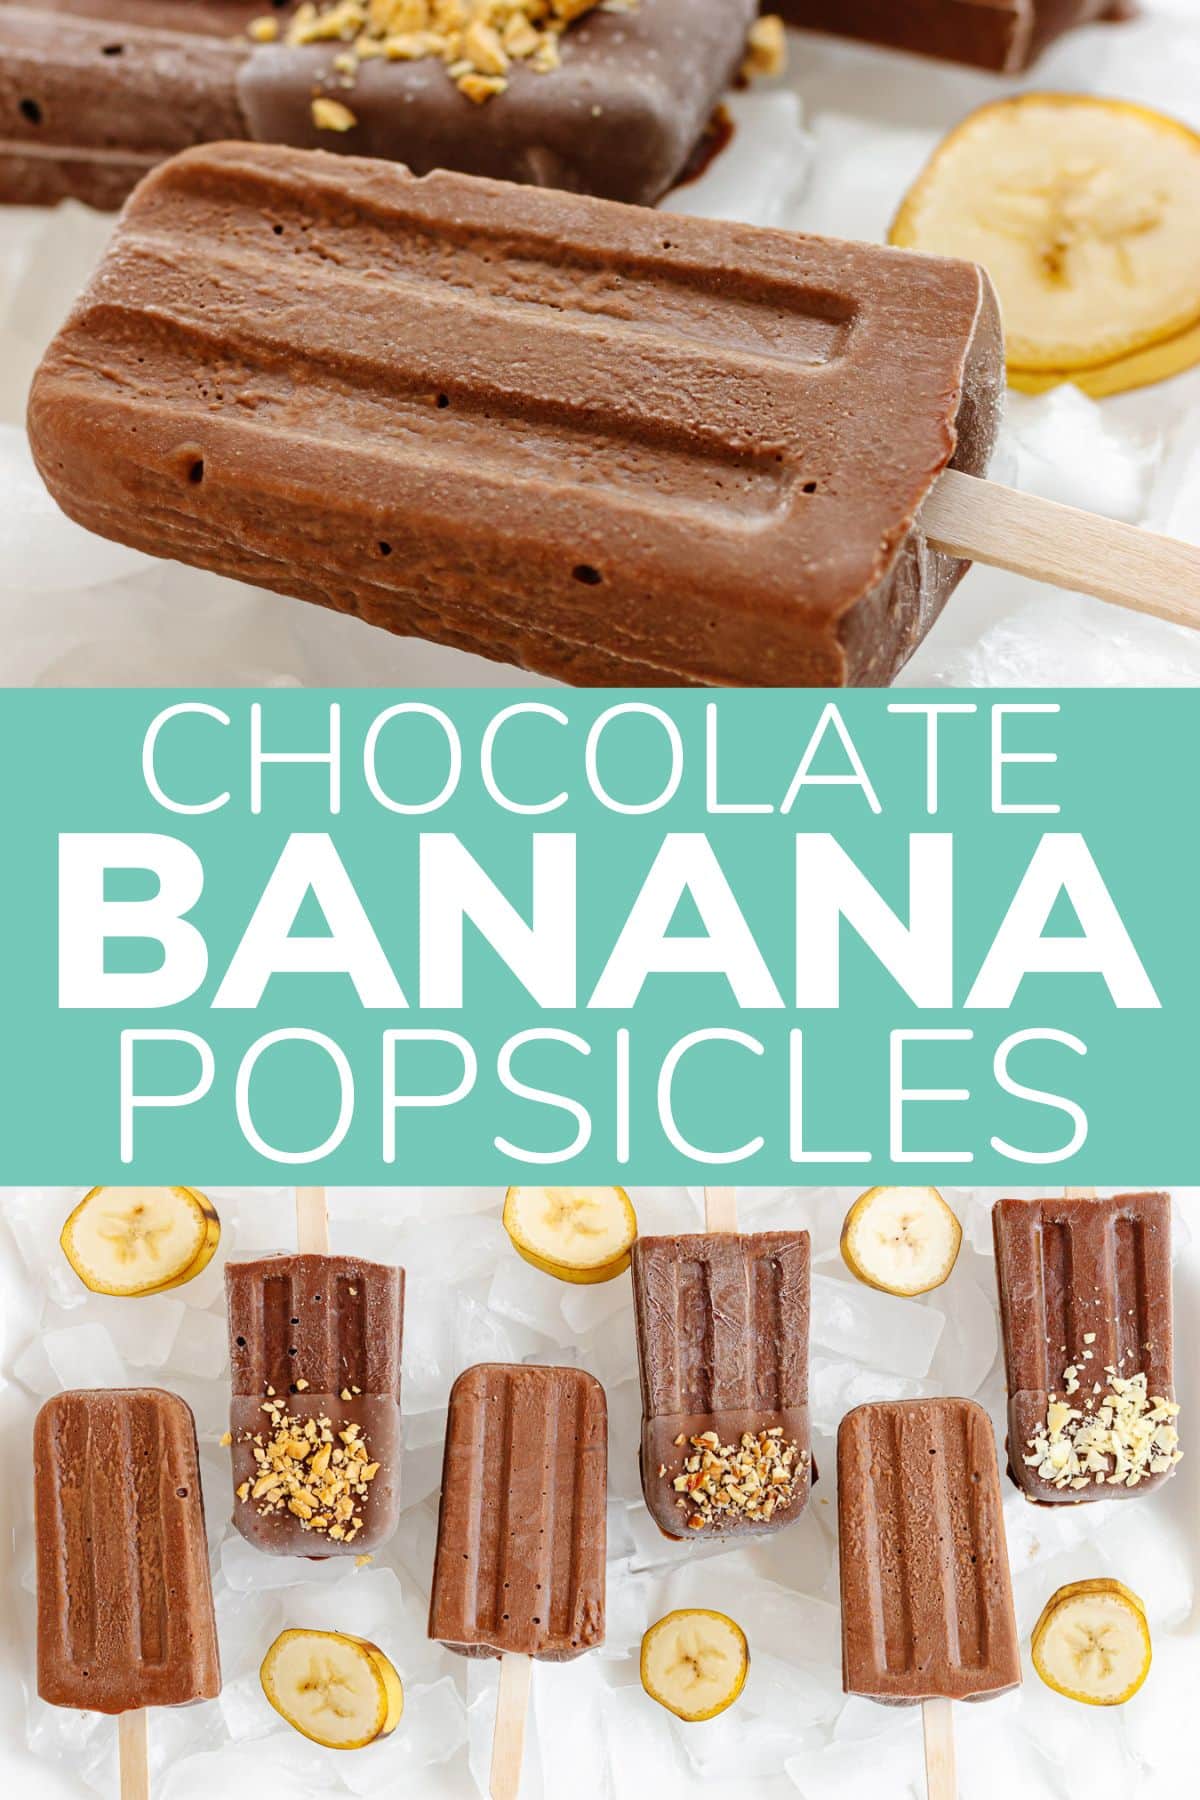 Photo collage pinterest graphic for Chocolate Banana Popsicles.